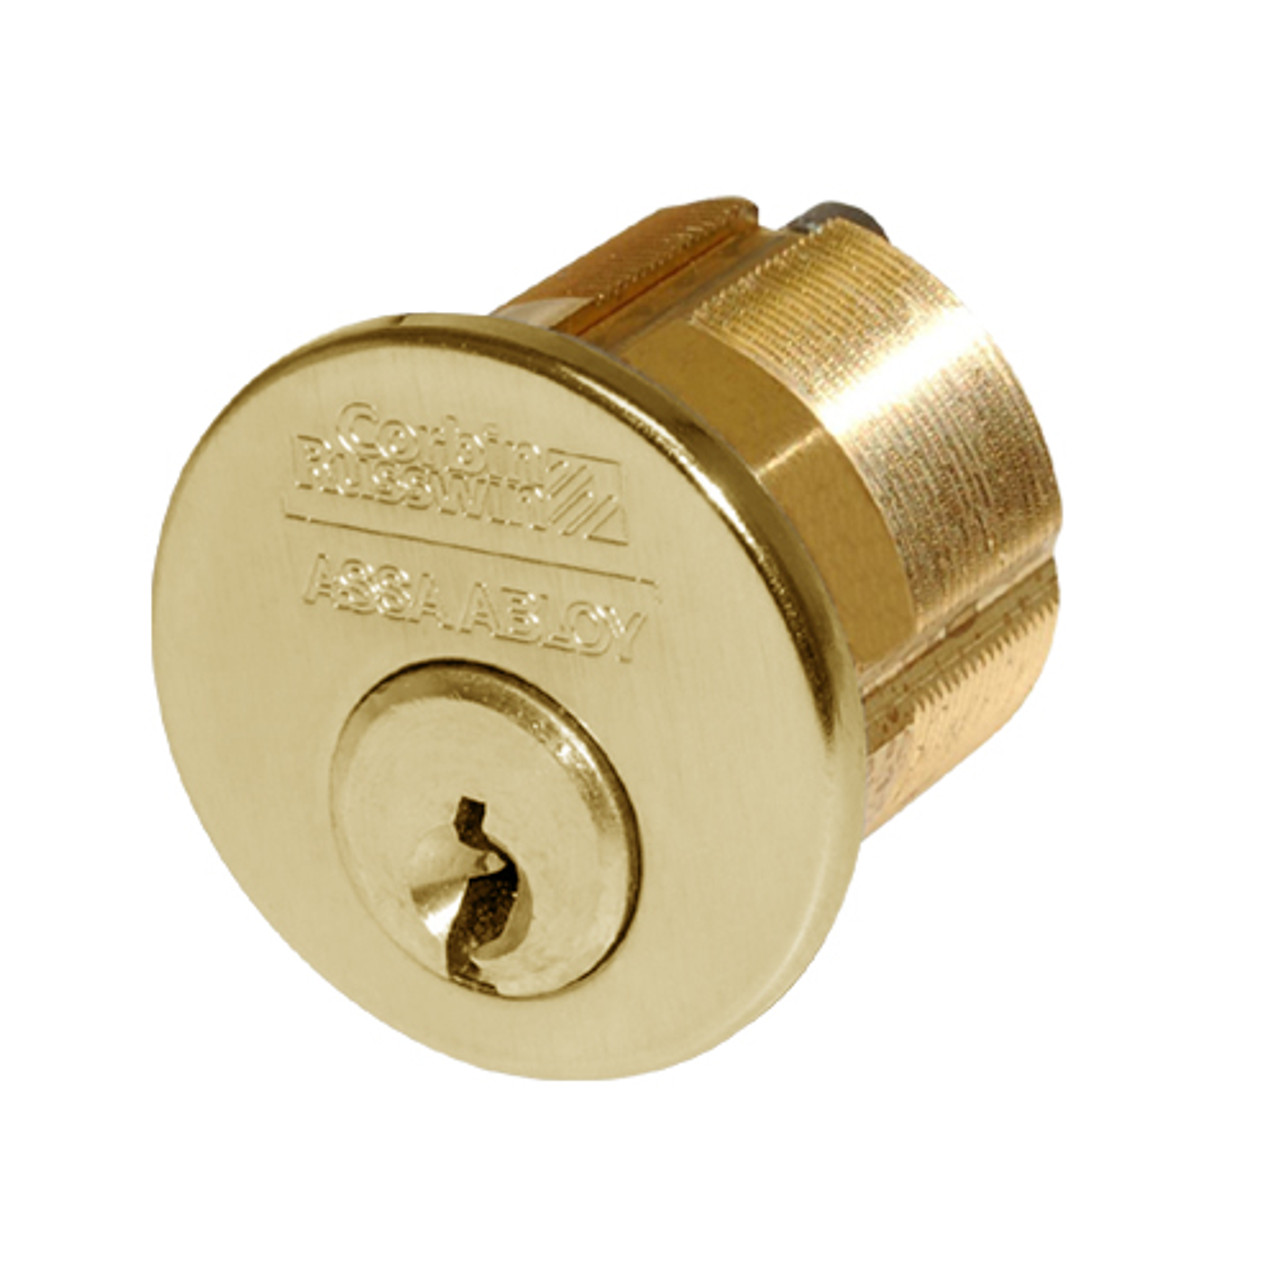 CR1000-200-A01-6-27-605 Corbin Conventional Mortise Cylinder for Mortise Lock and DL3000 Deadlocks with Cloverleaf Cam in Bright Brass Finish